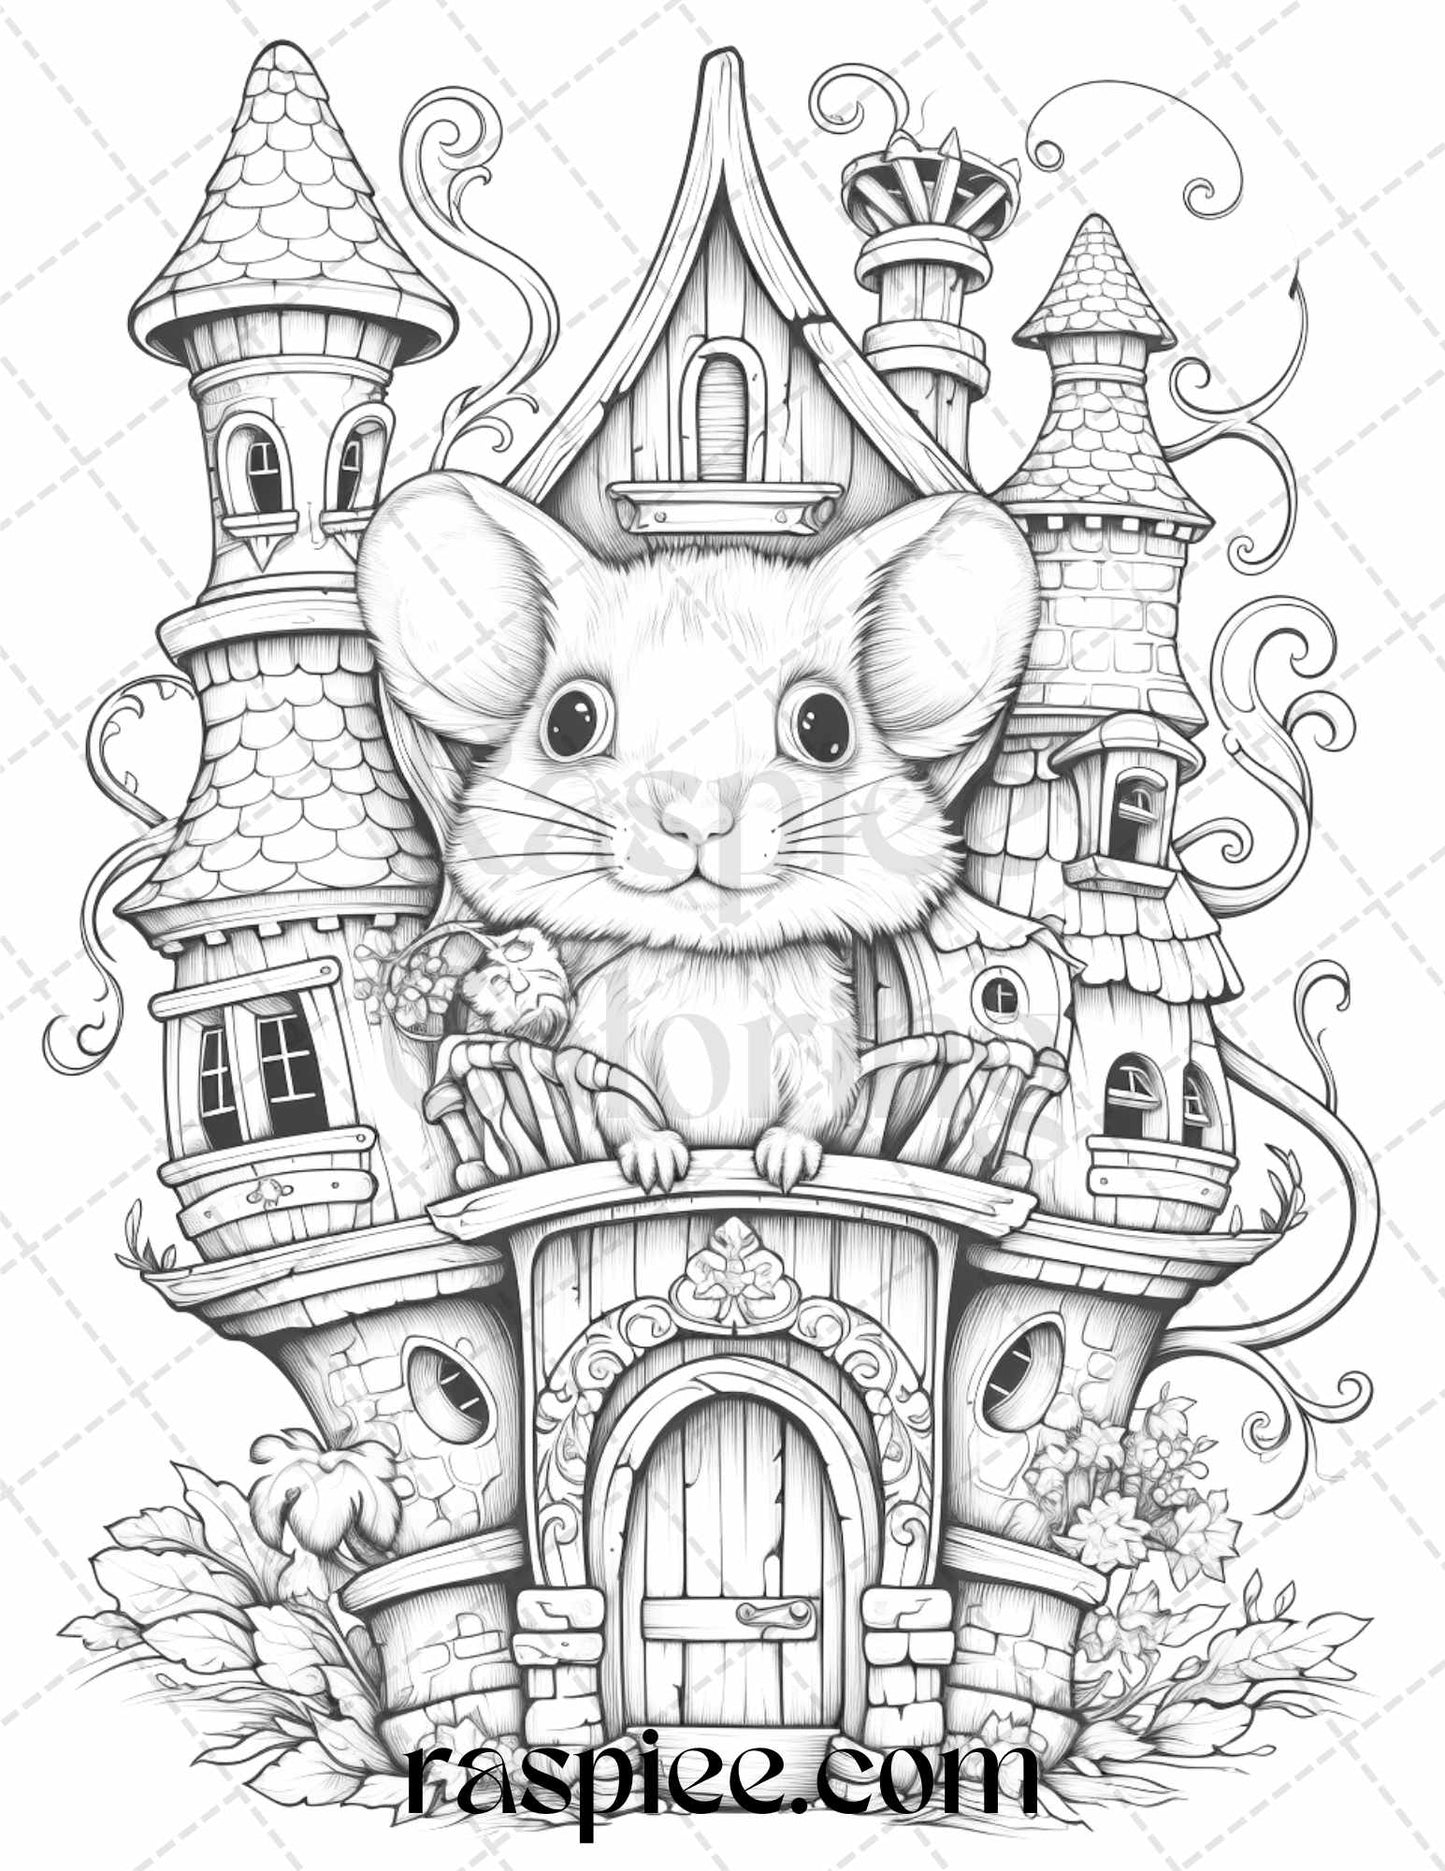 40 Magical Mouse Houses Grayscale Coloring Pages Printable for Adults, PDF File Instant Download - raspiee